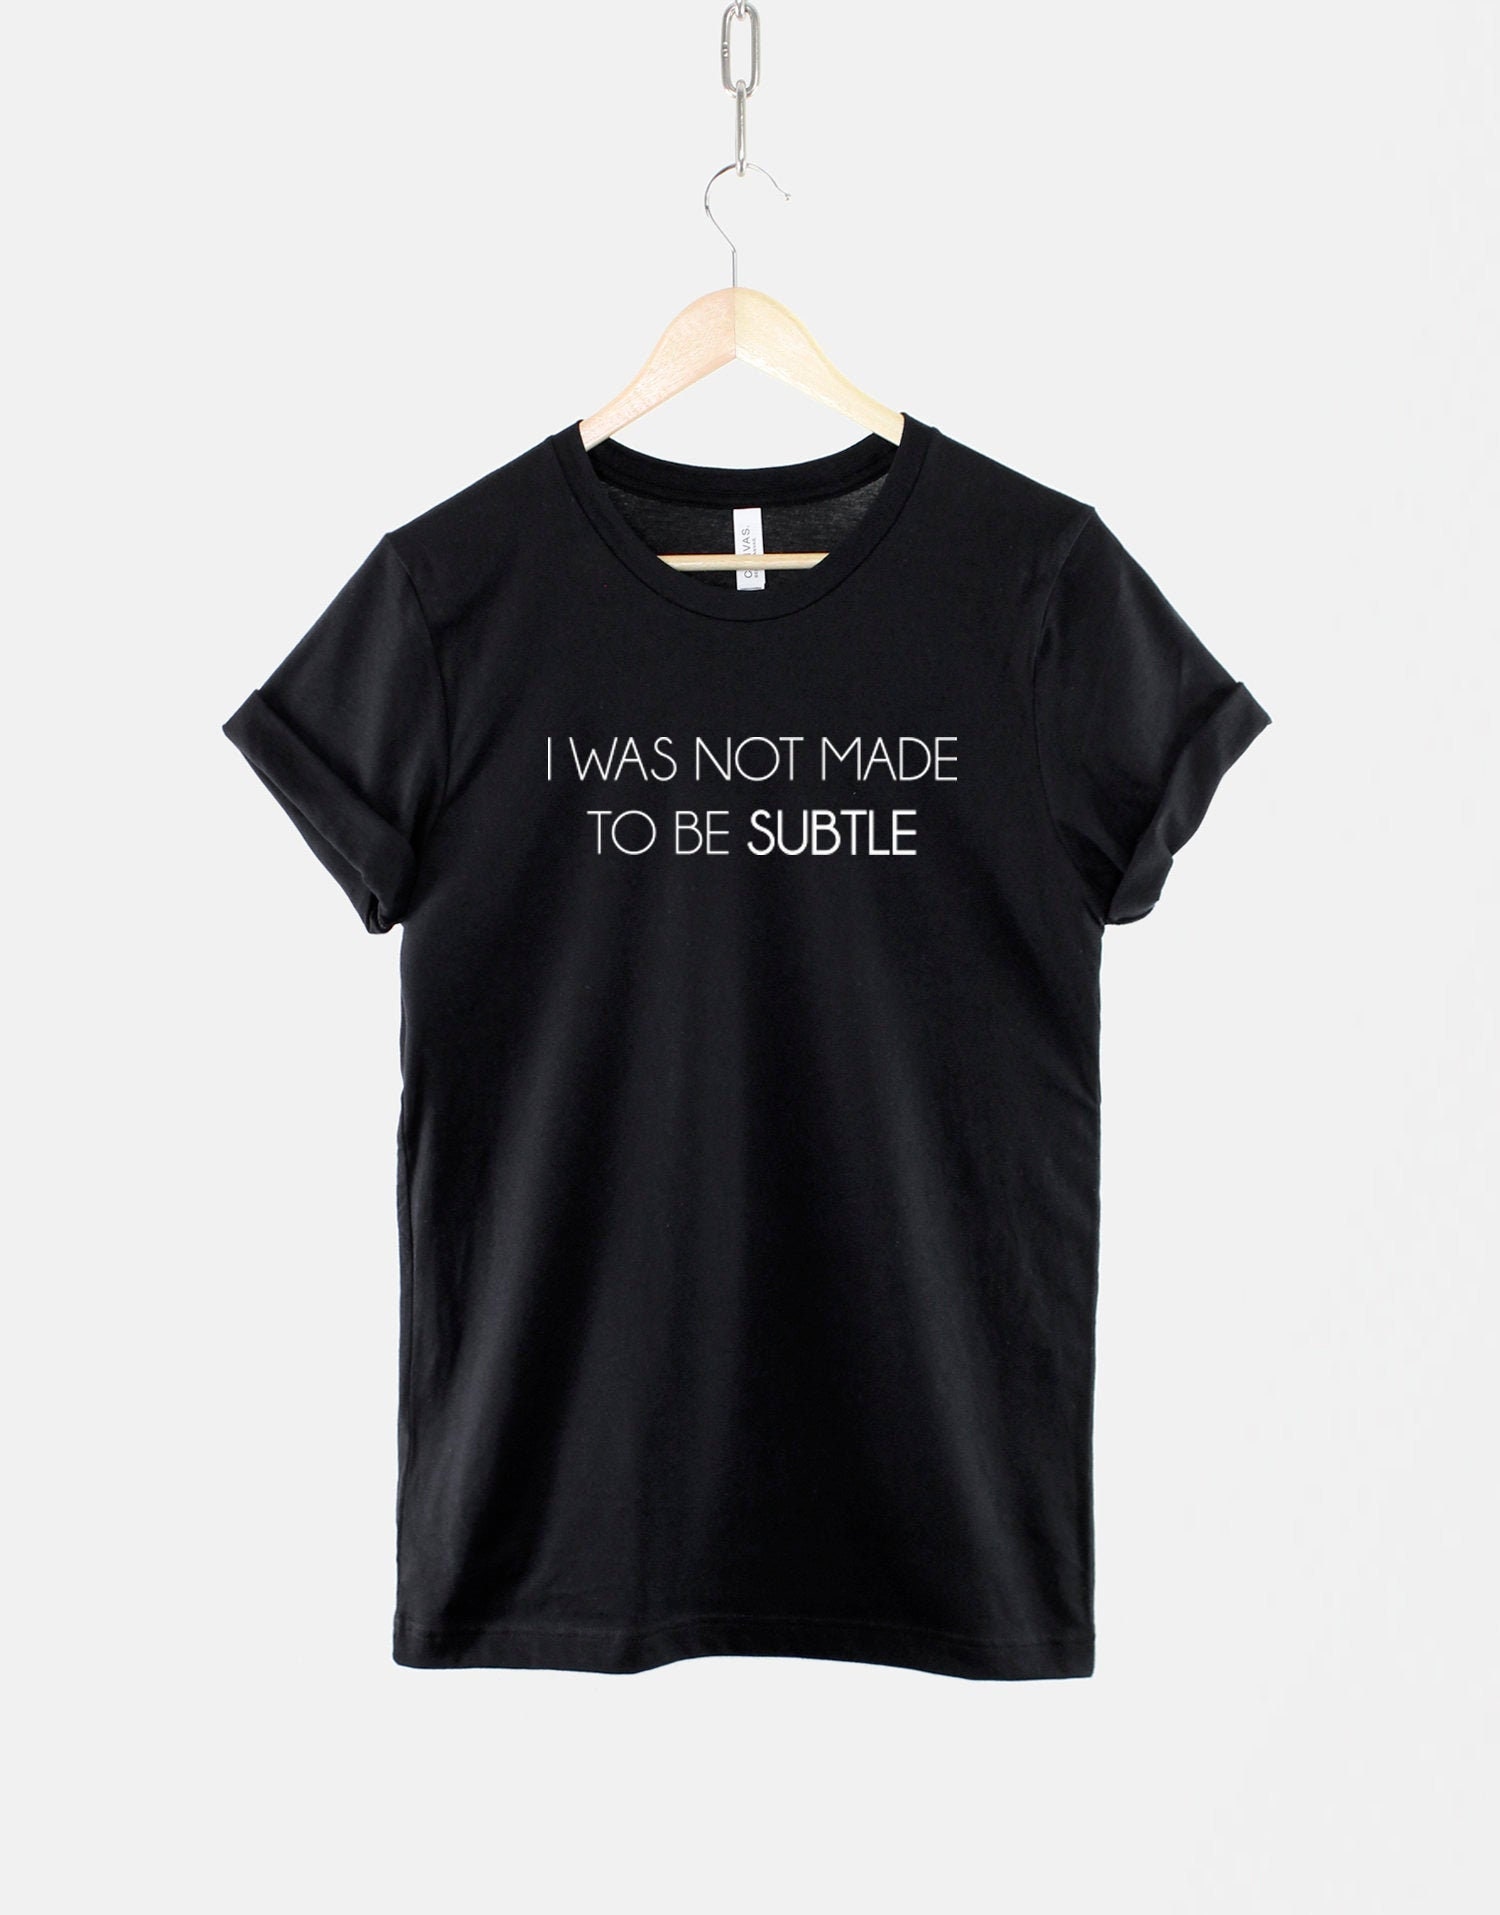 I Was Not to Be Subtle Feminist Girl T - Etsy